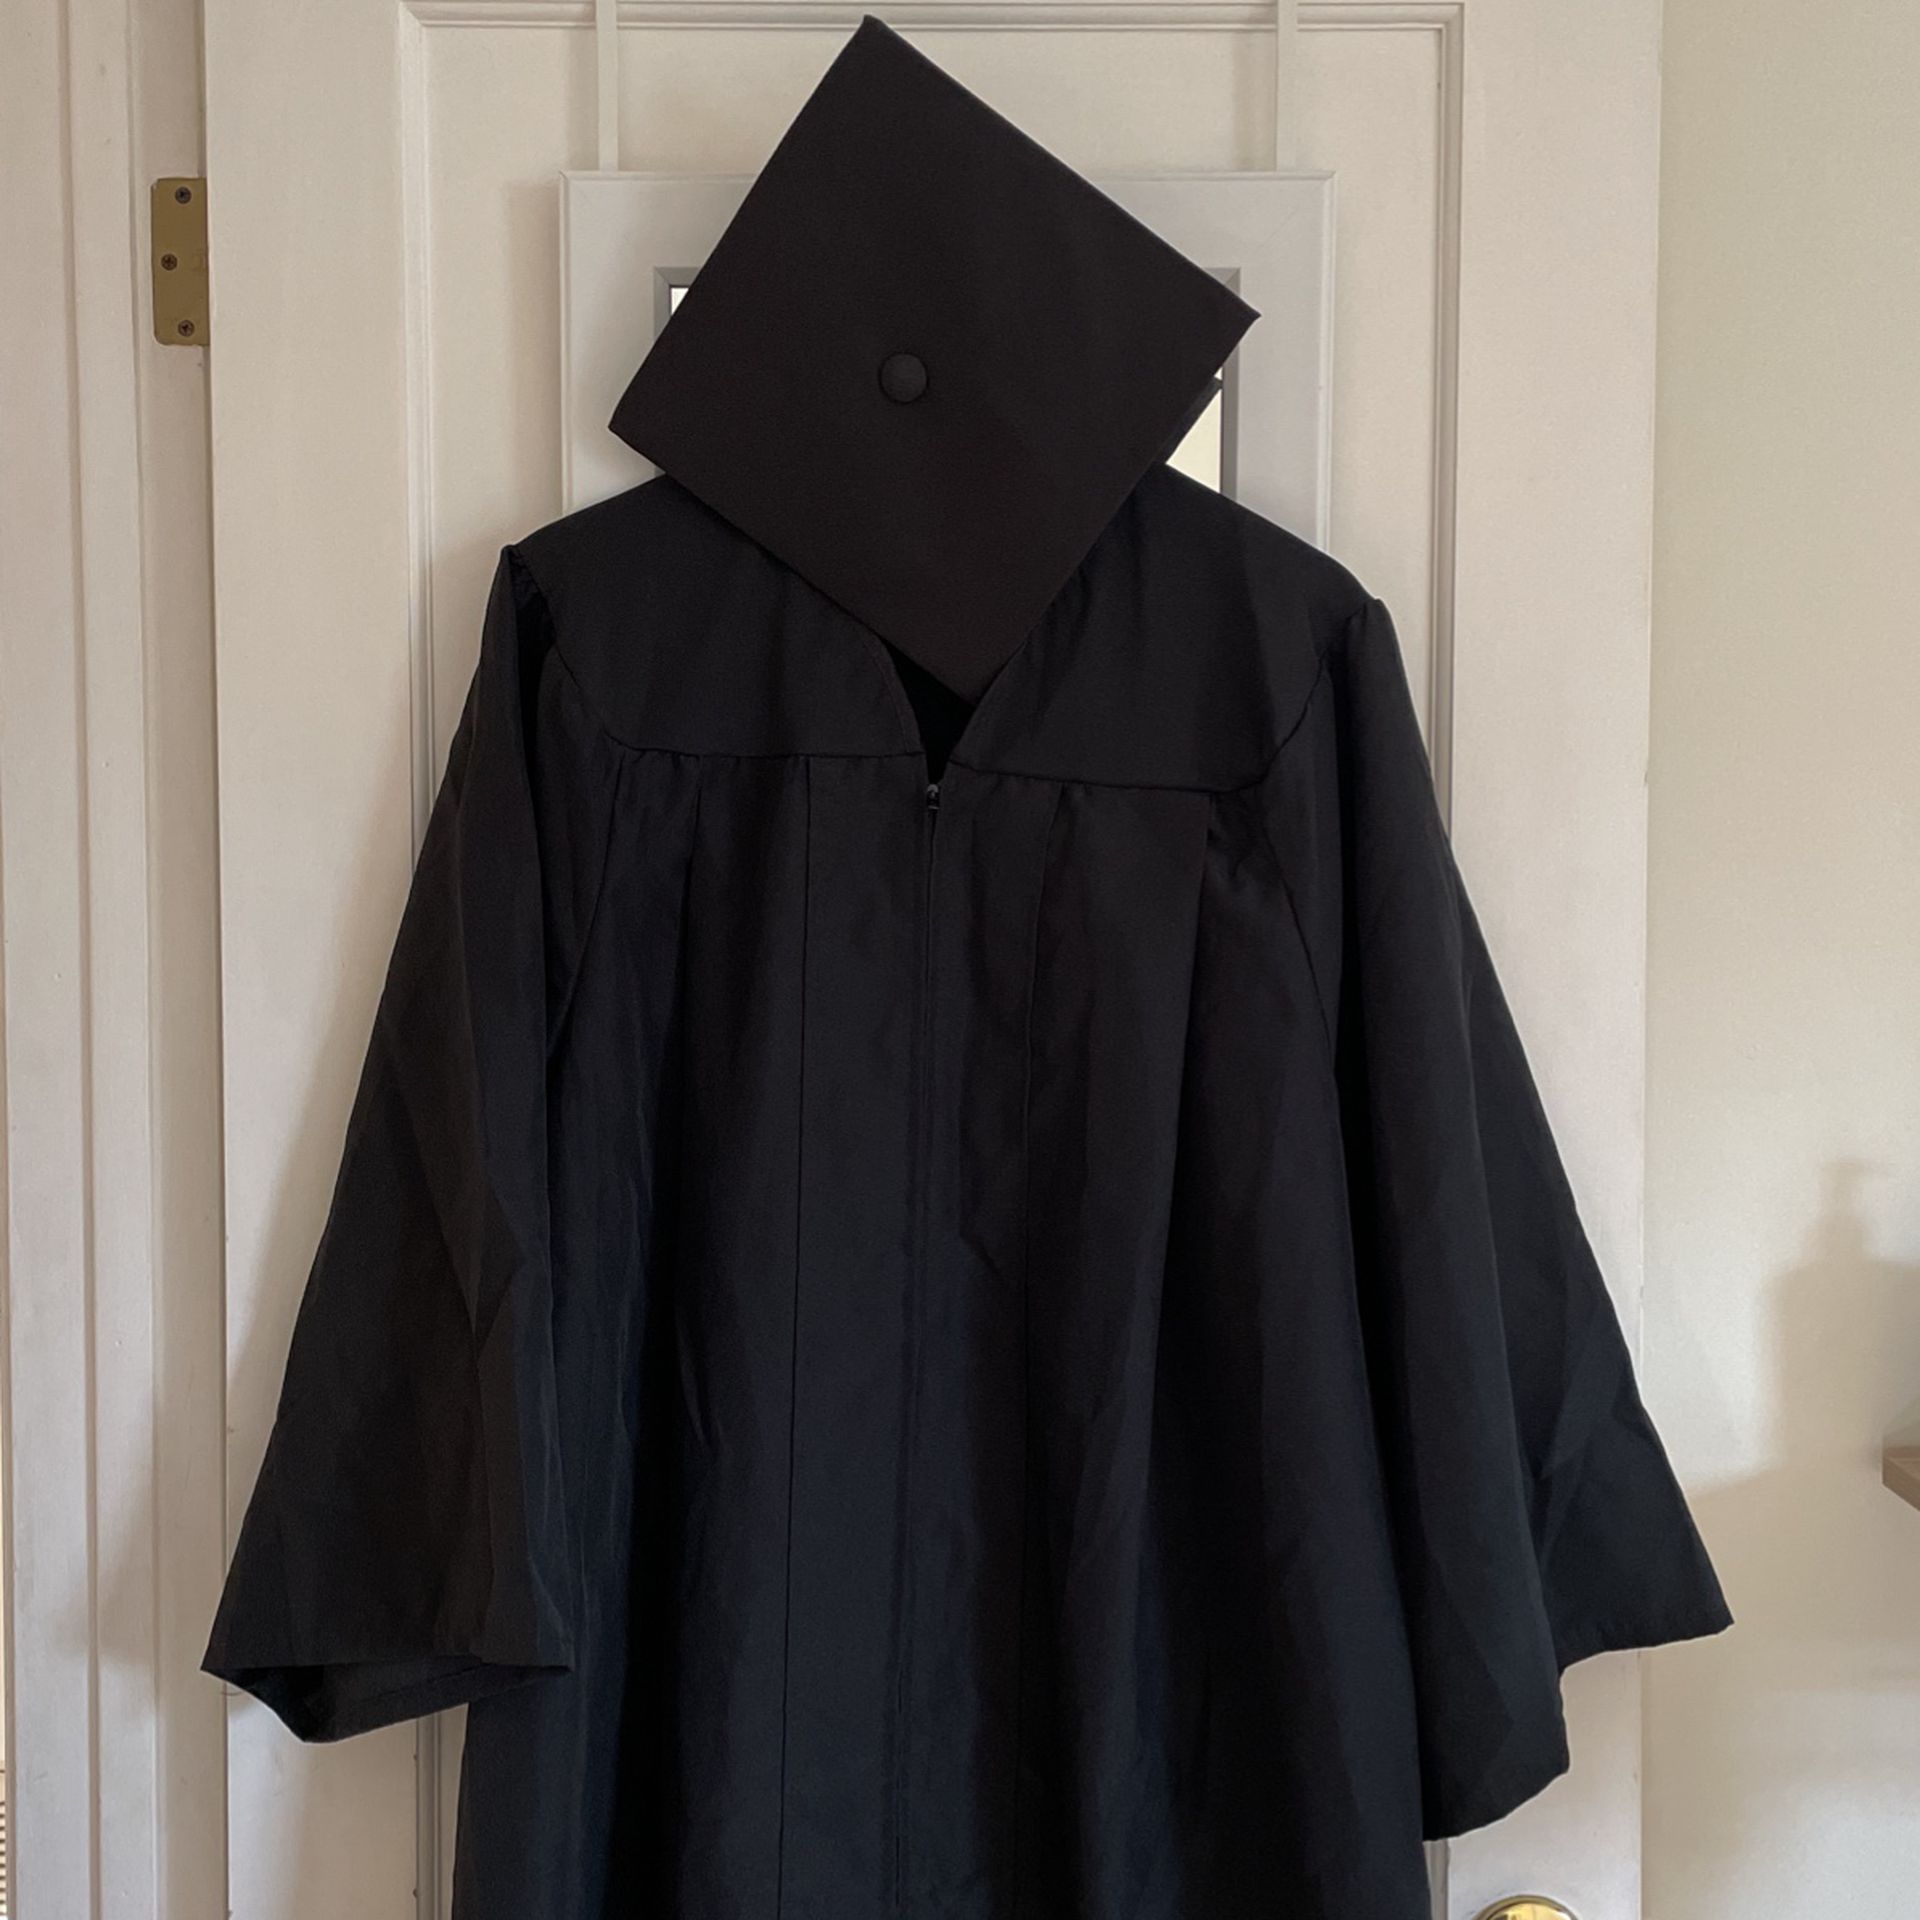 Black Cap And Gown For Graduation